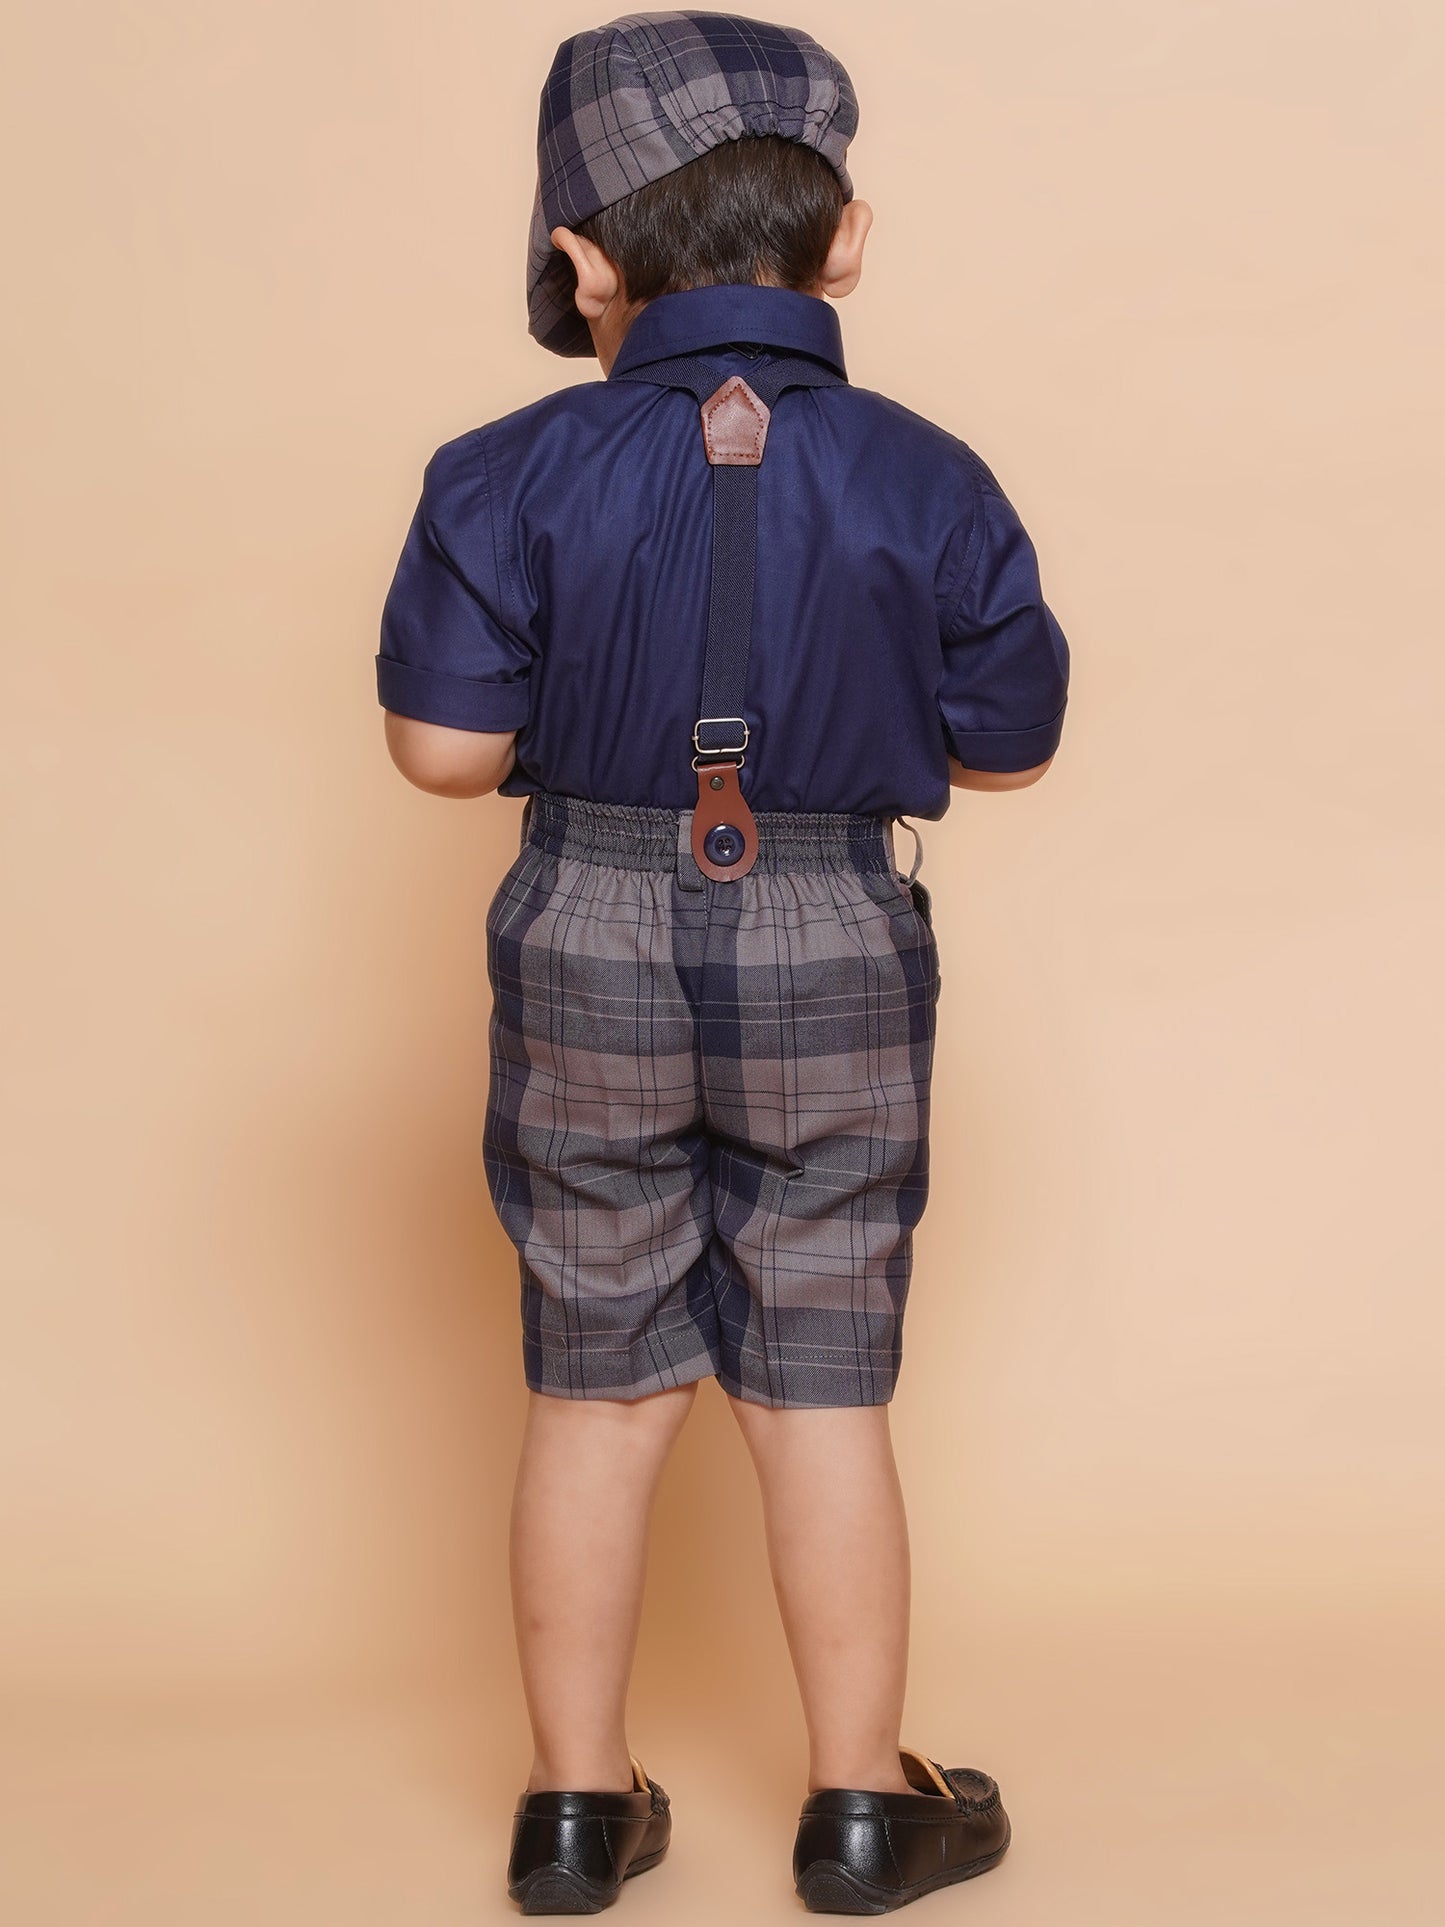 Boys Kids Navy Blue Cotton Printed Shirt Shorts With Cap and Suspender Set